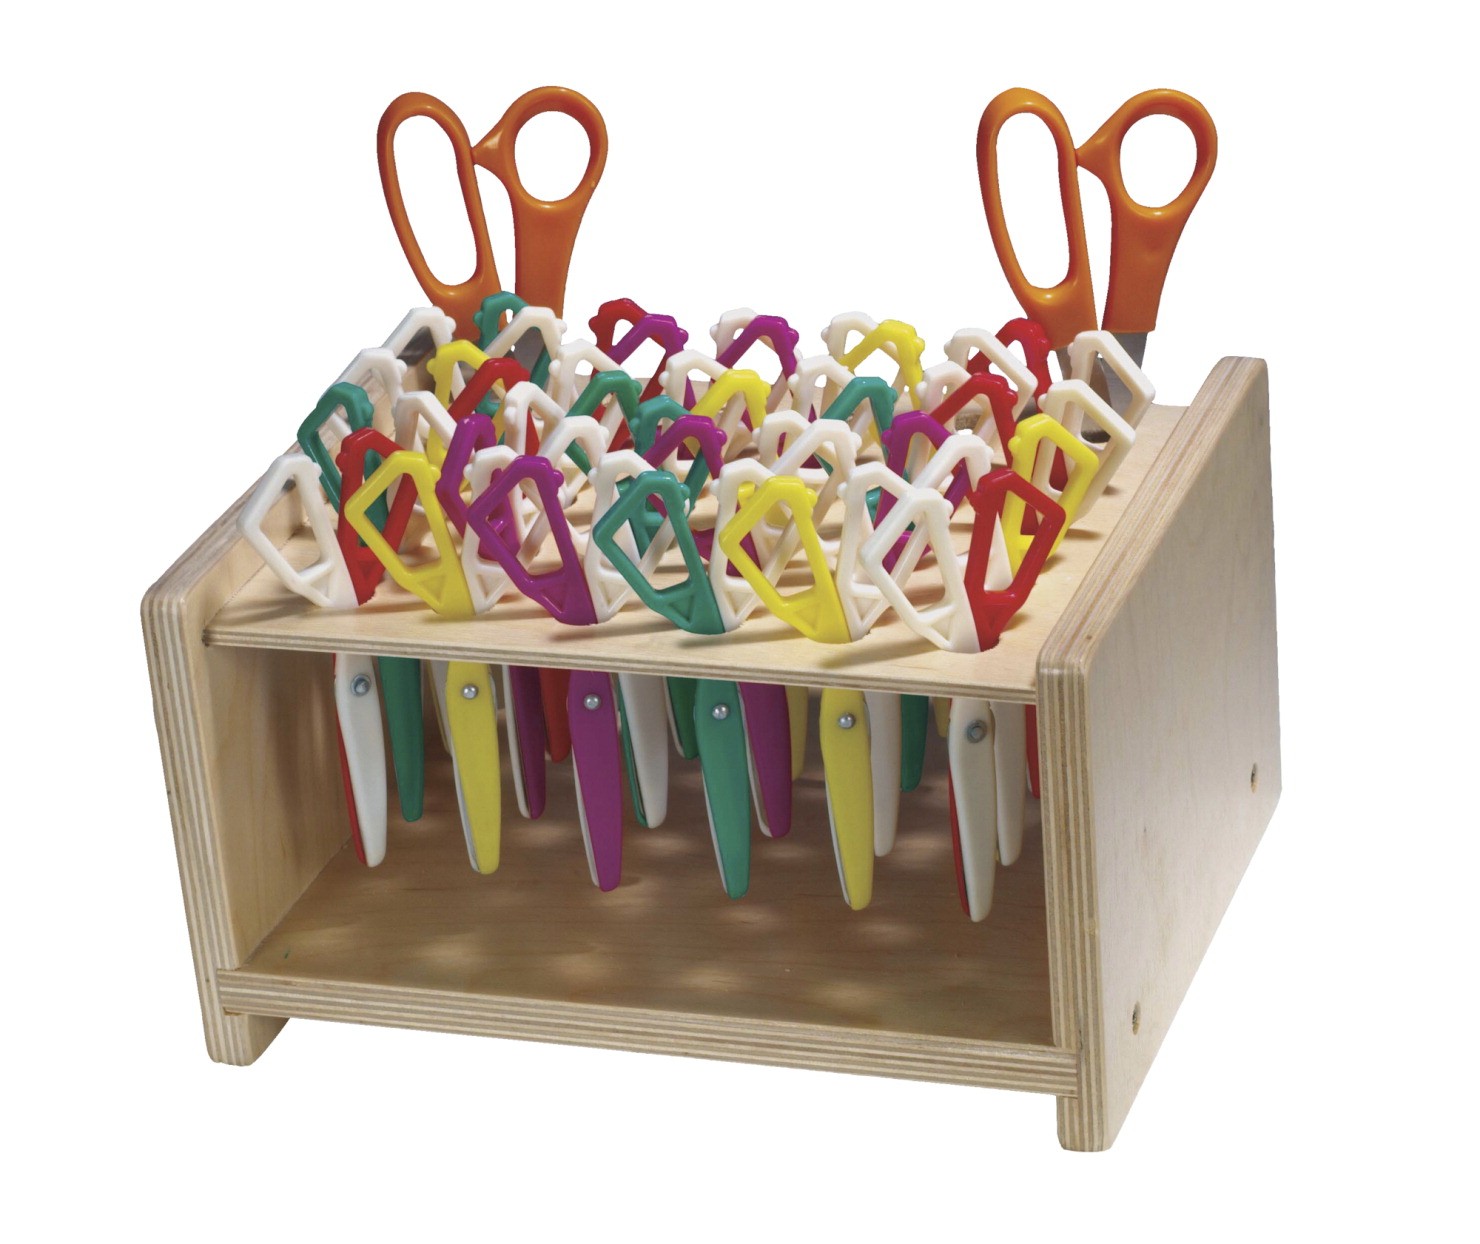 Scissors Classroom Pack with Rack, Assorted Colors, 24 Safety Scissors